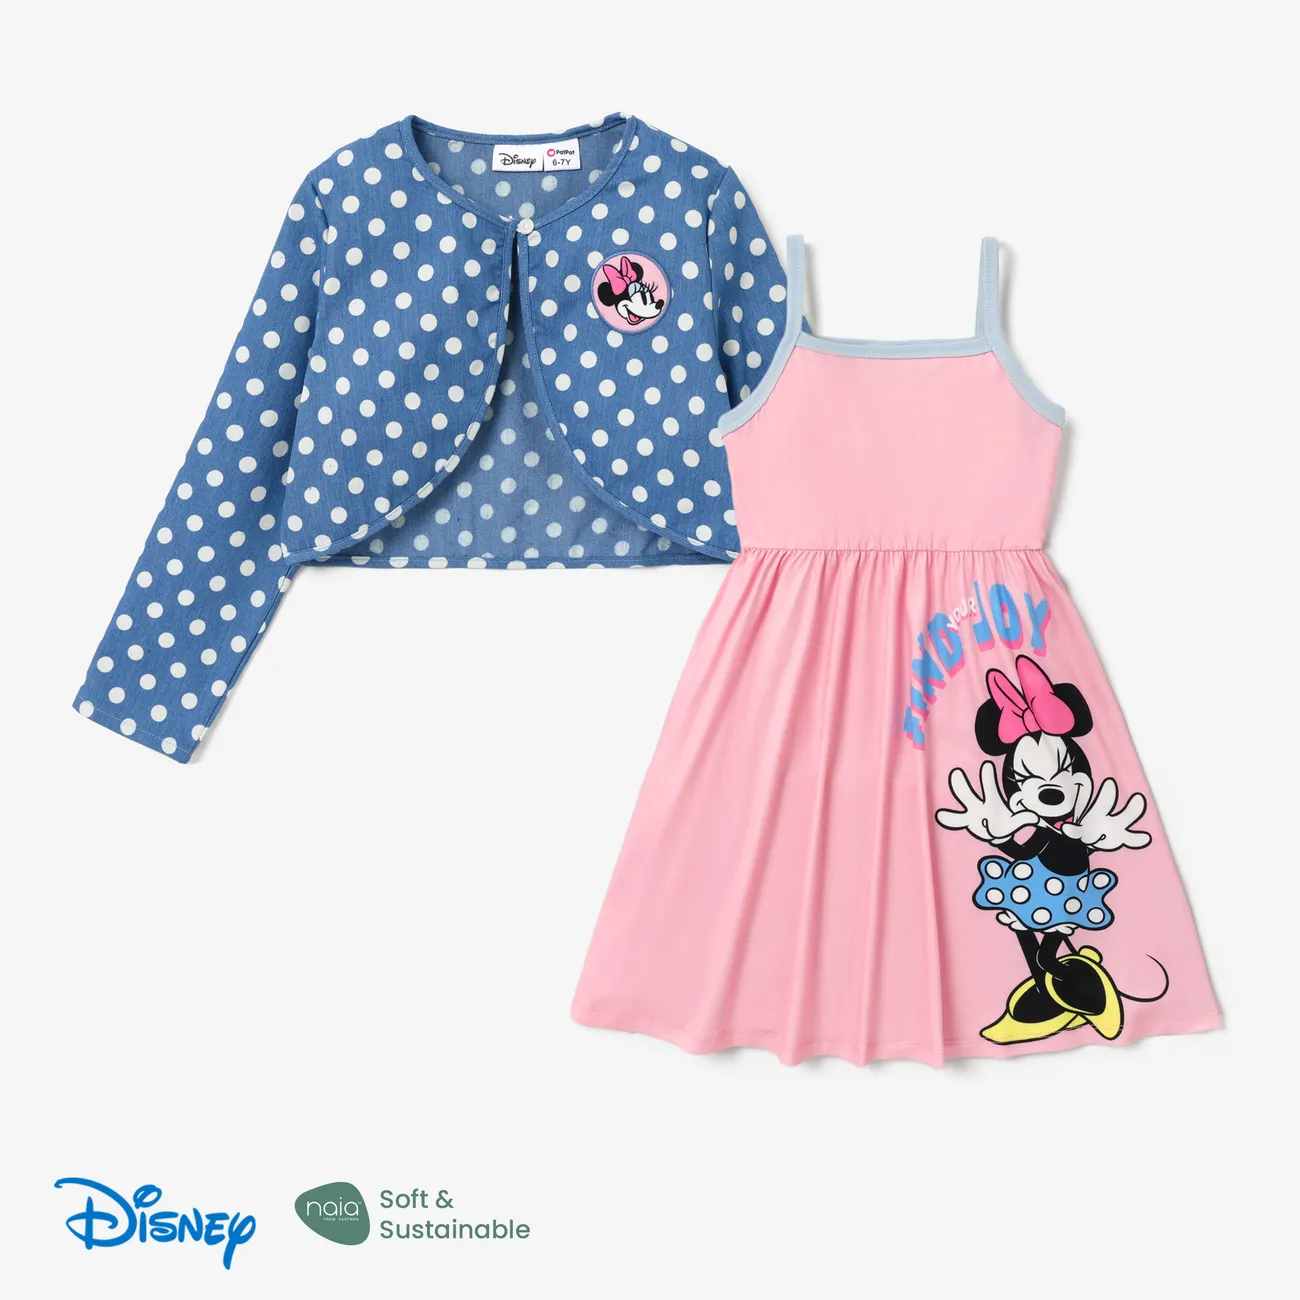 Disney Mickey and Friends Enfants Costume jupe Fille Personnage Rose big image 1